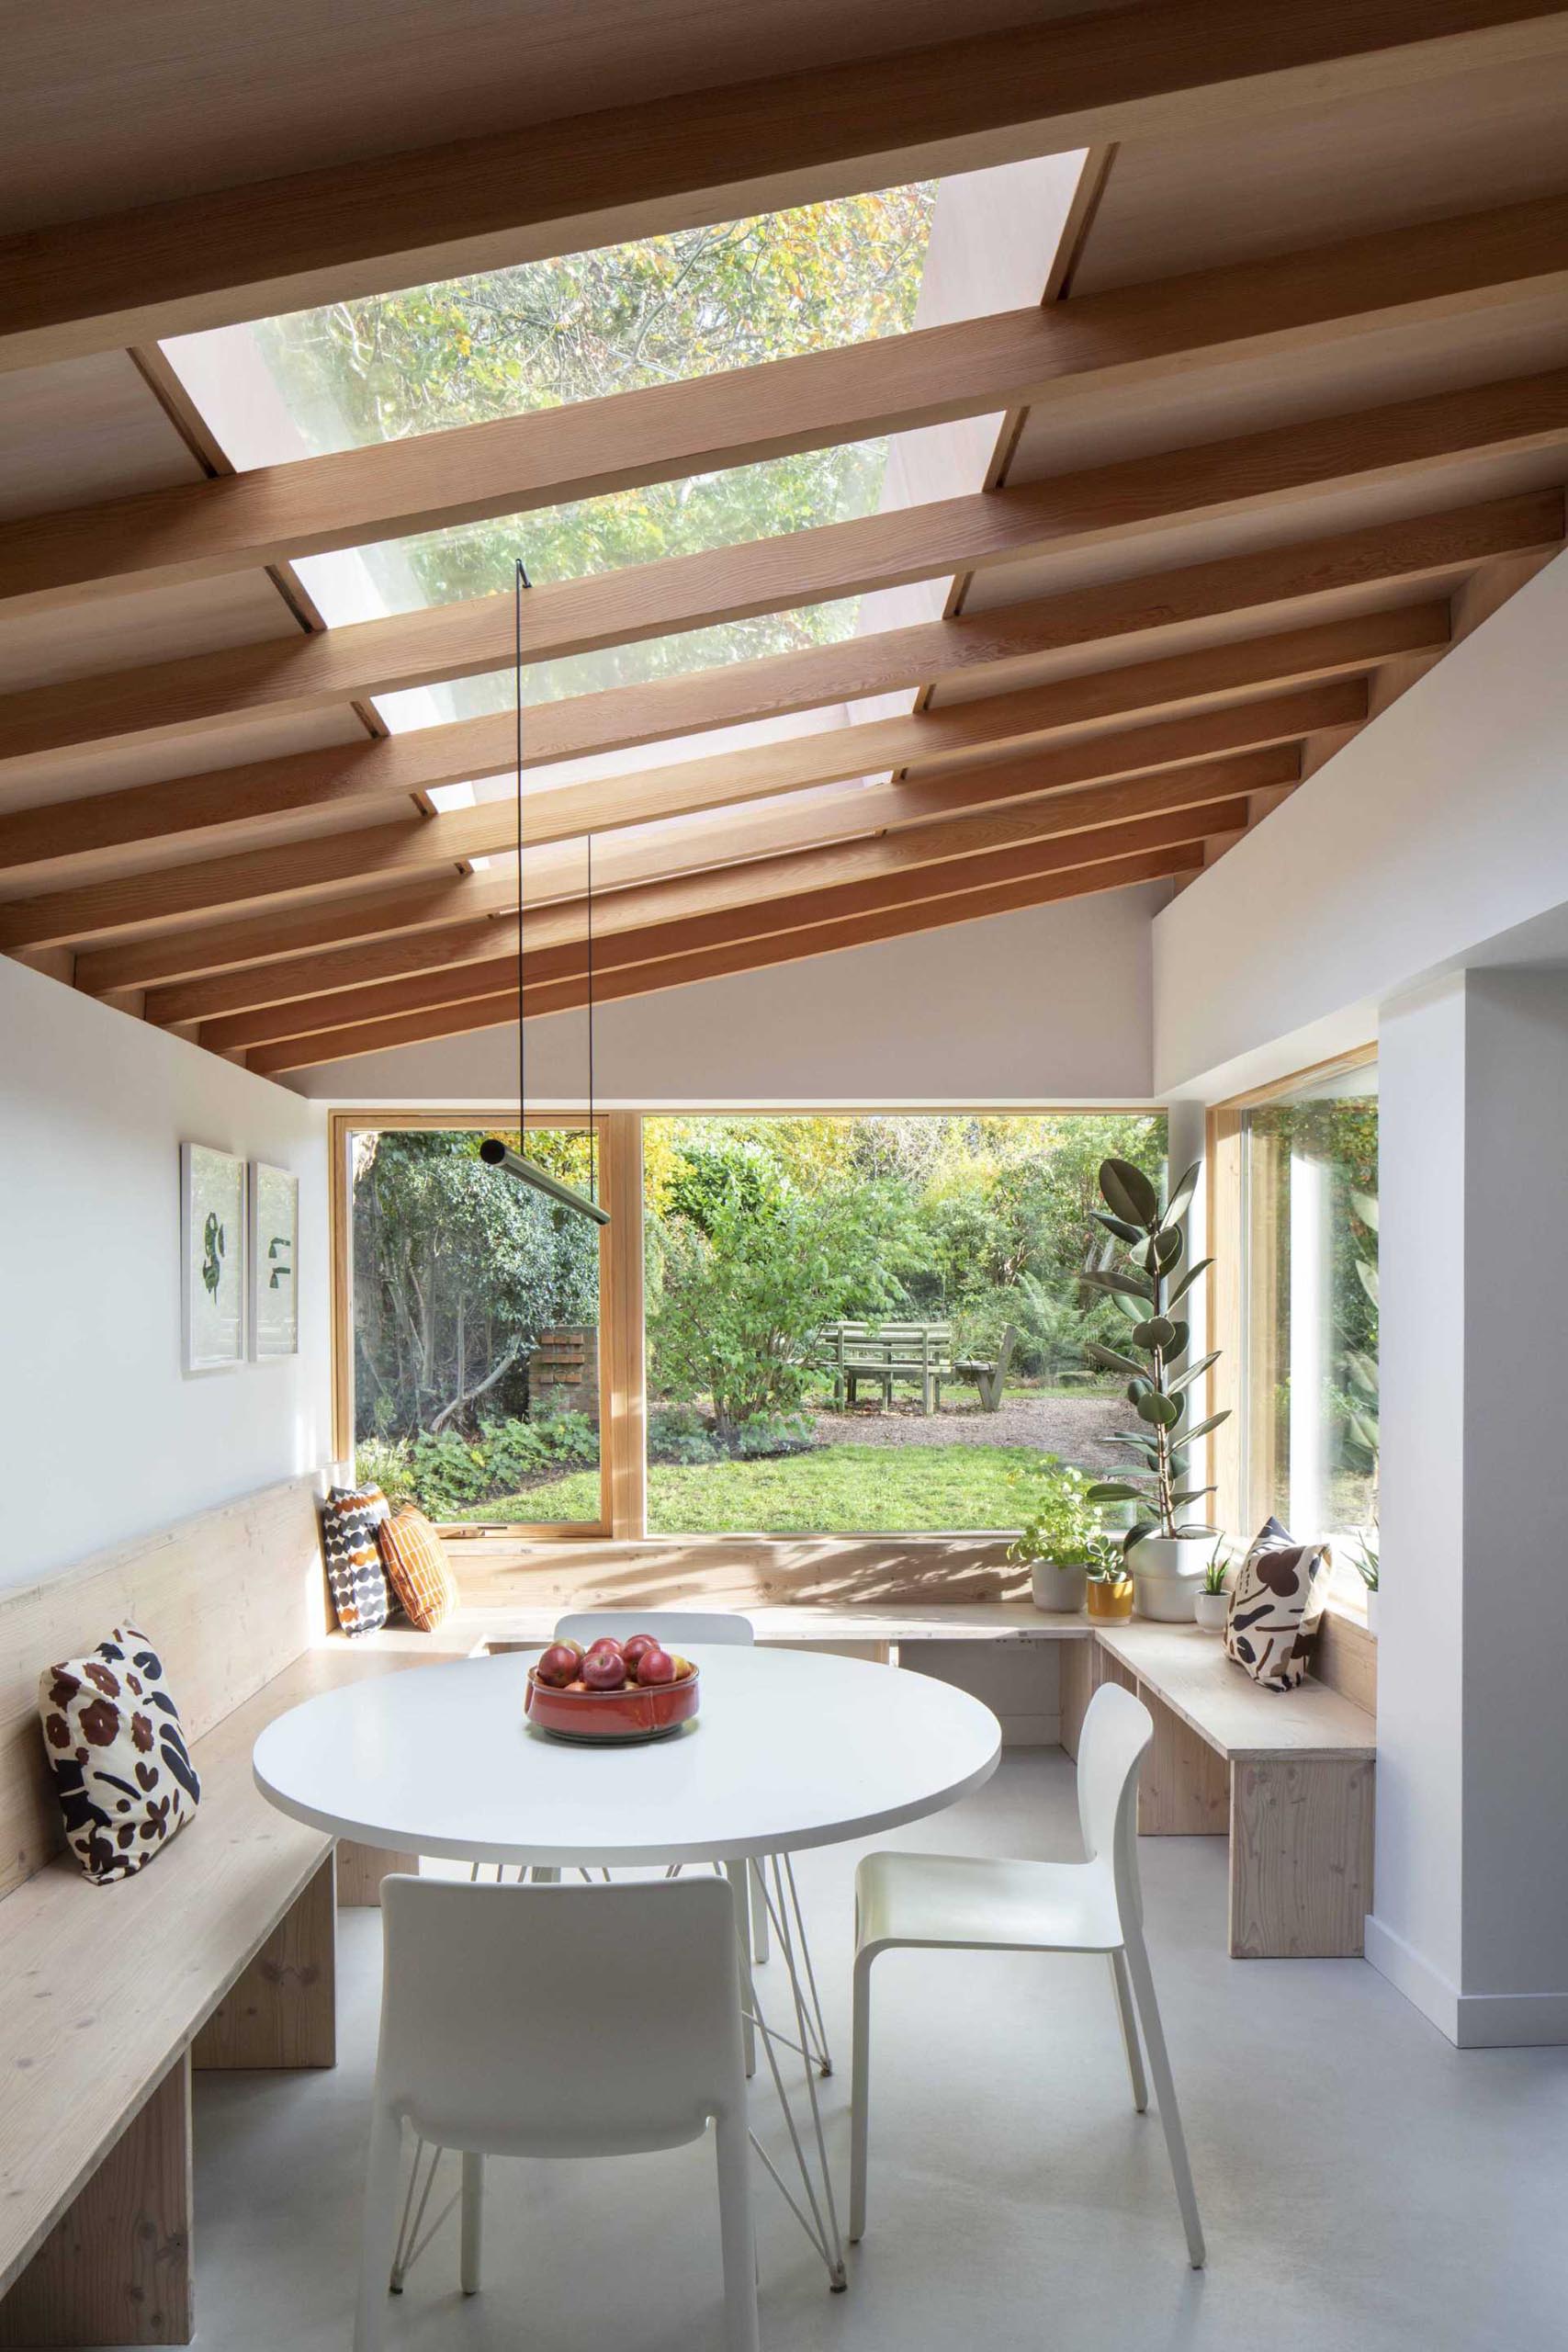 A wrap-around wood window bench complements the exposed wood overhead.